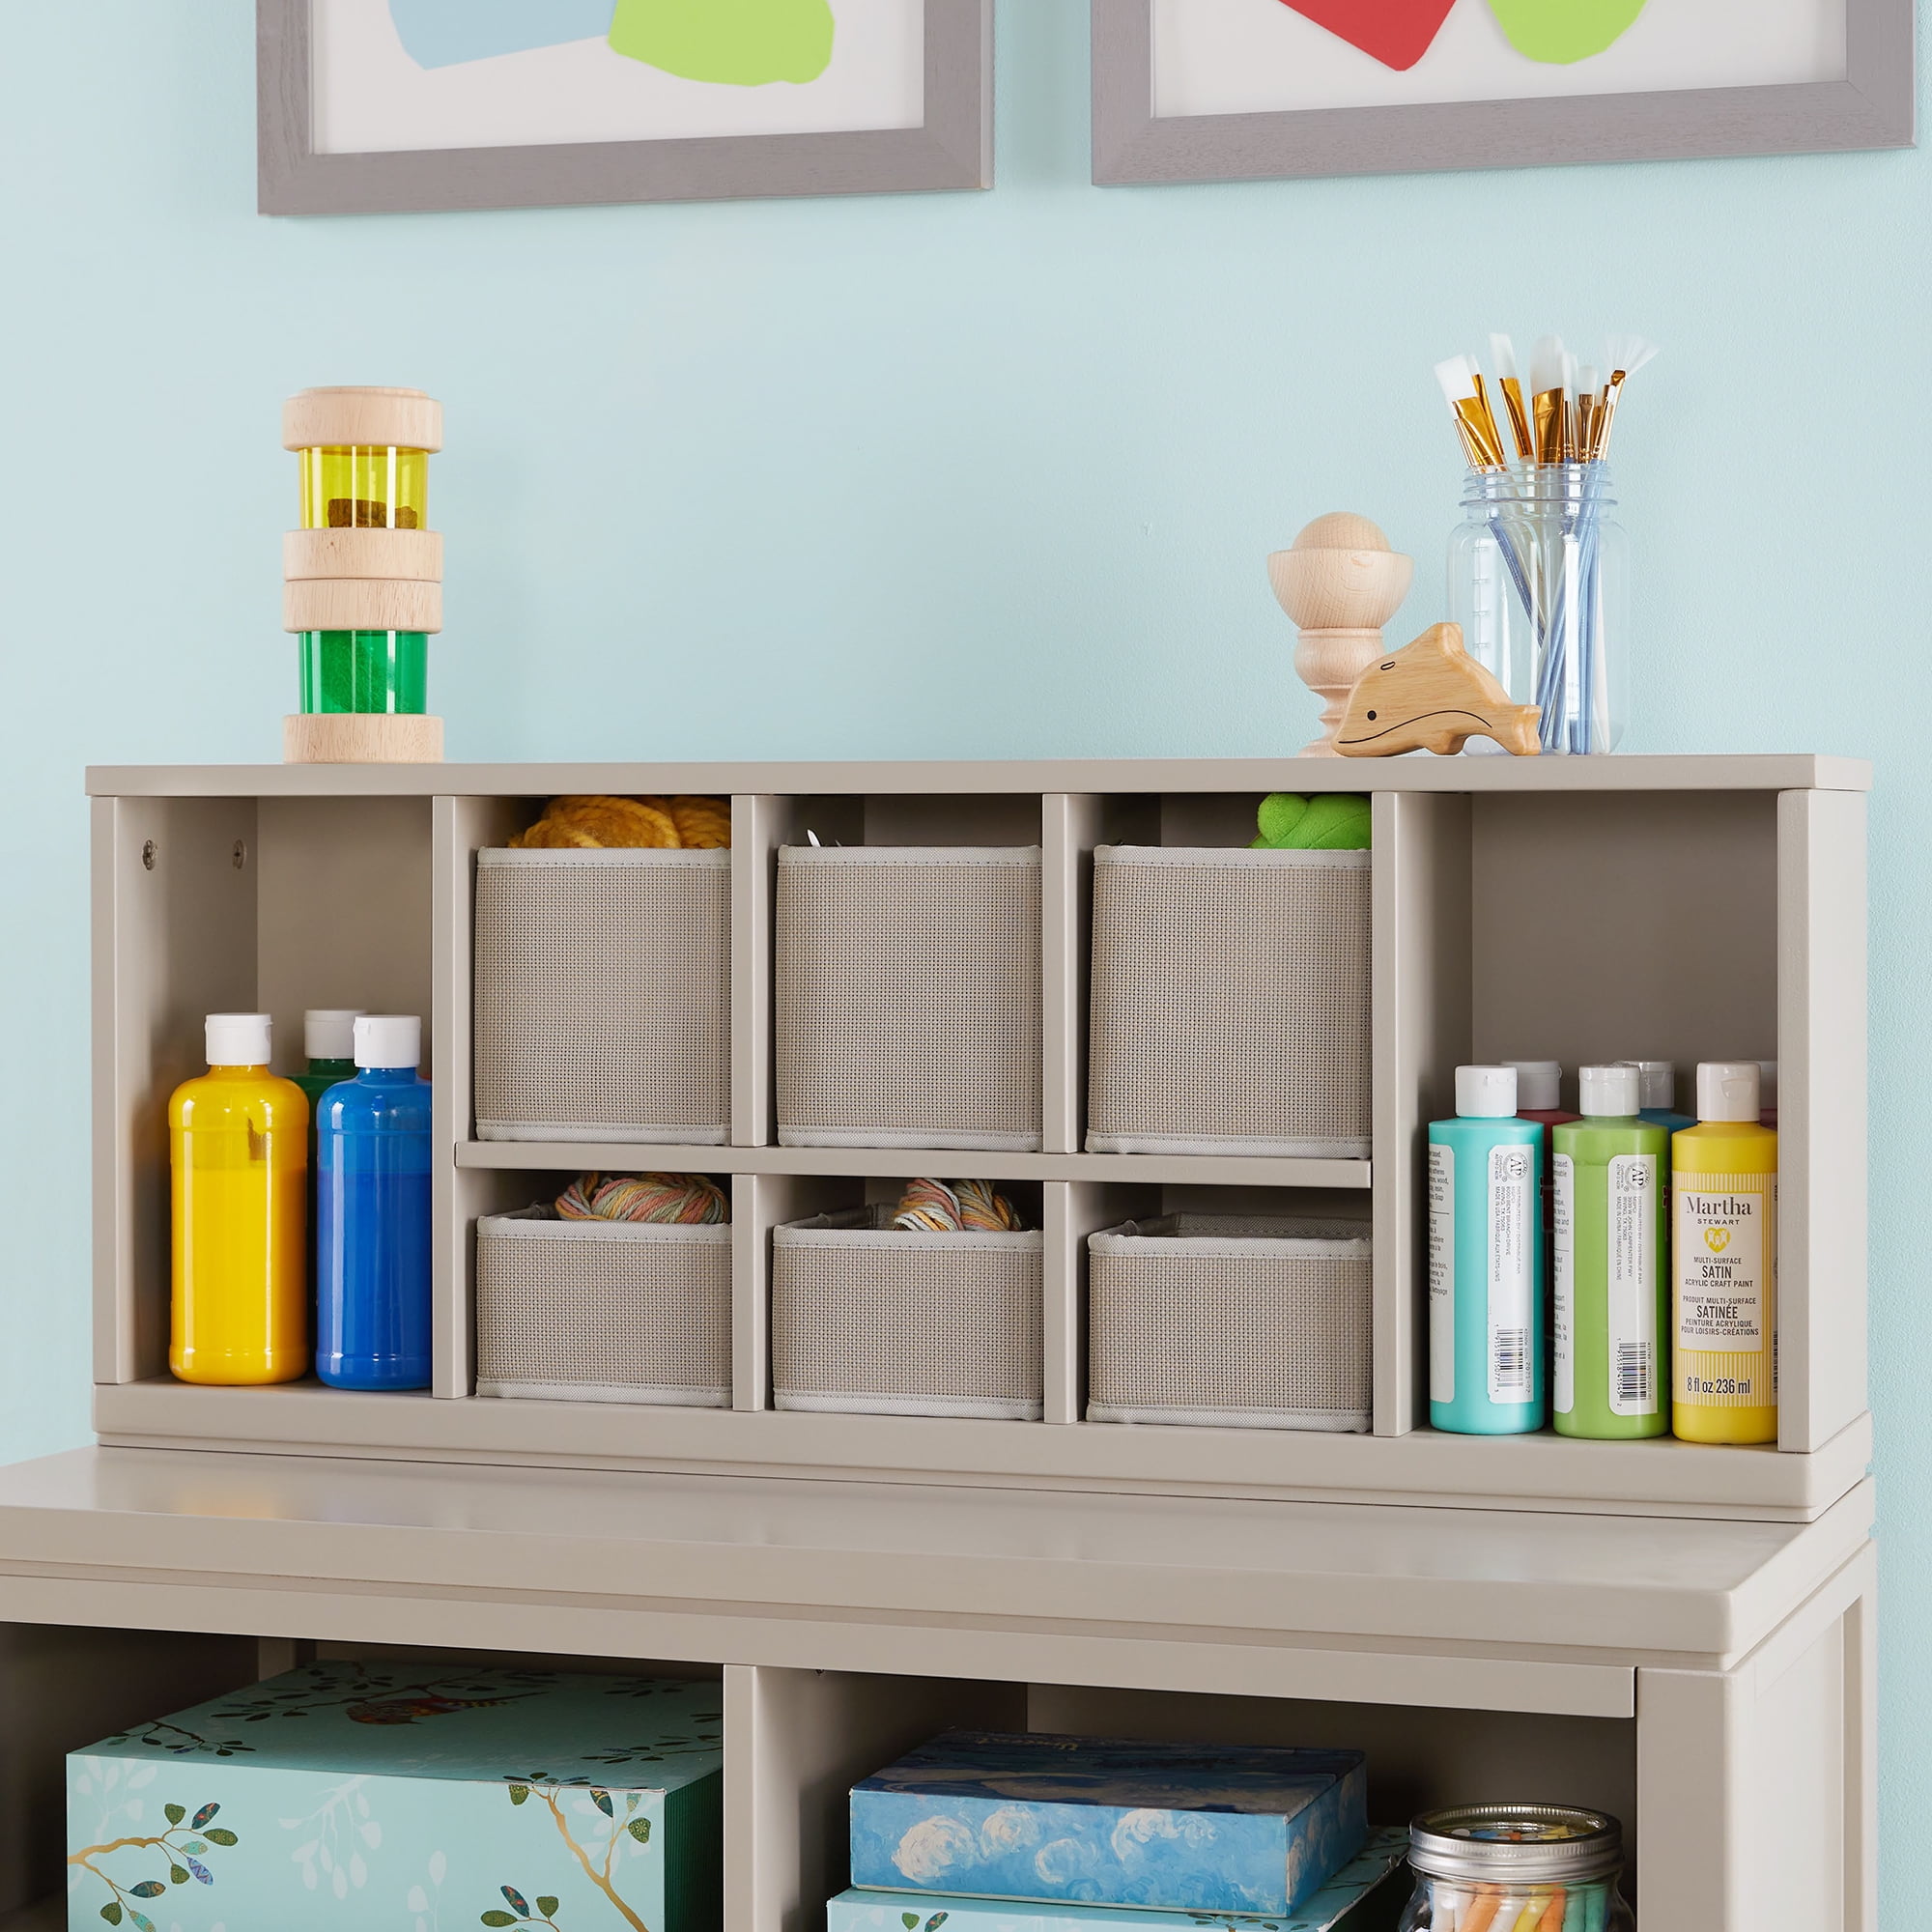 Martha Stewart Crafting Kids' Cubby Organizer - Gray, Wooden Tabletop Arts  and Crafts Storage with Bins for Paint, Paper, Brushes, and Artwork